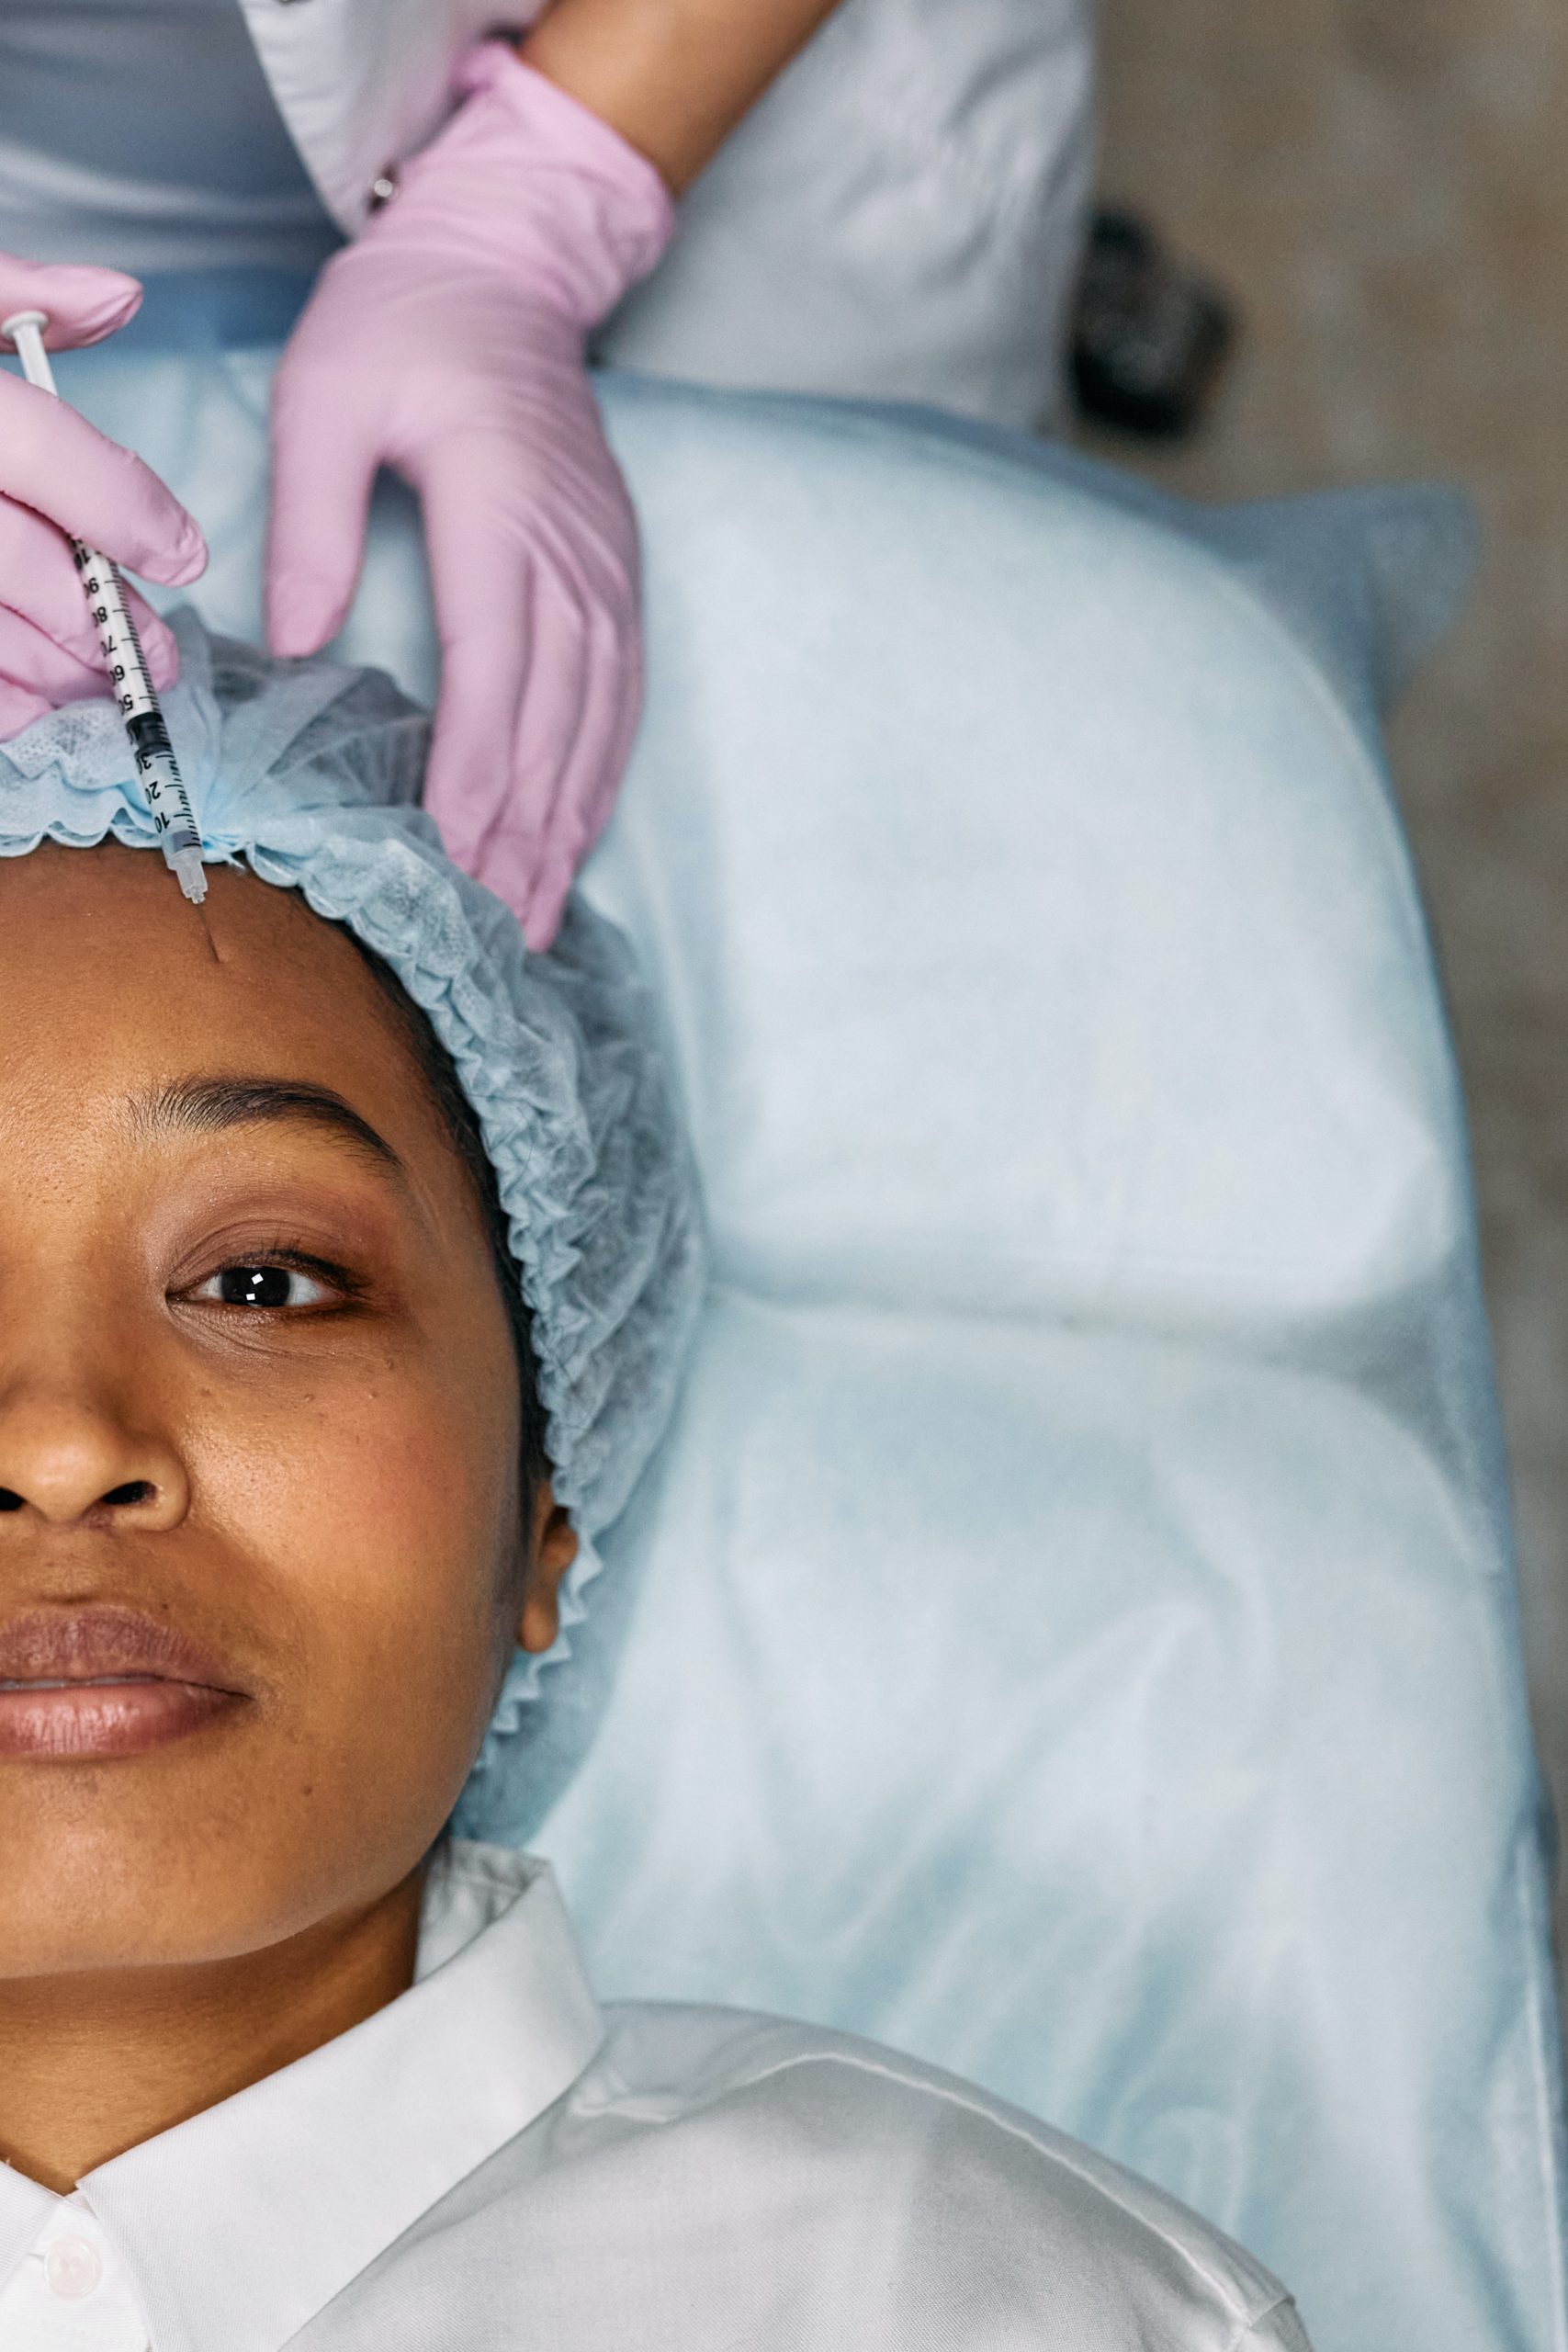 What You Need to Know about Botox